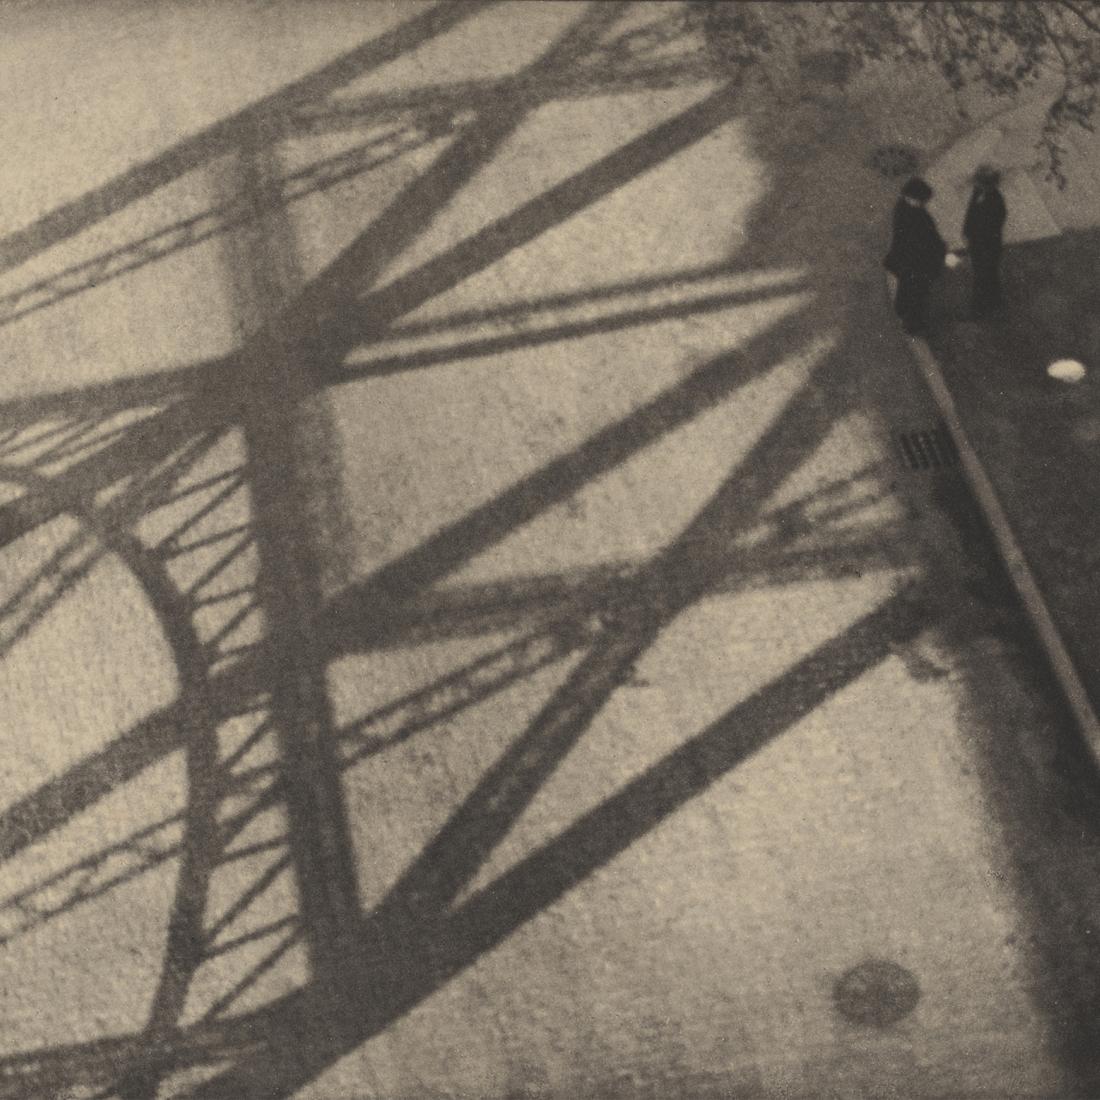 Paul Strand, From the Viaduct, 125th Street, New York, 1915, Photogravure